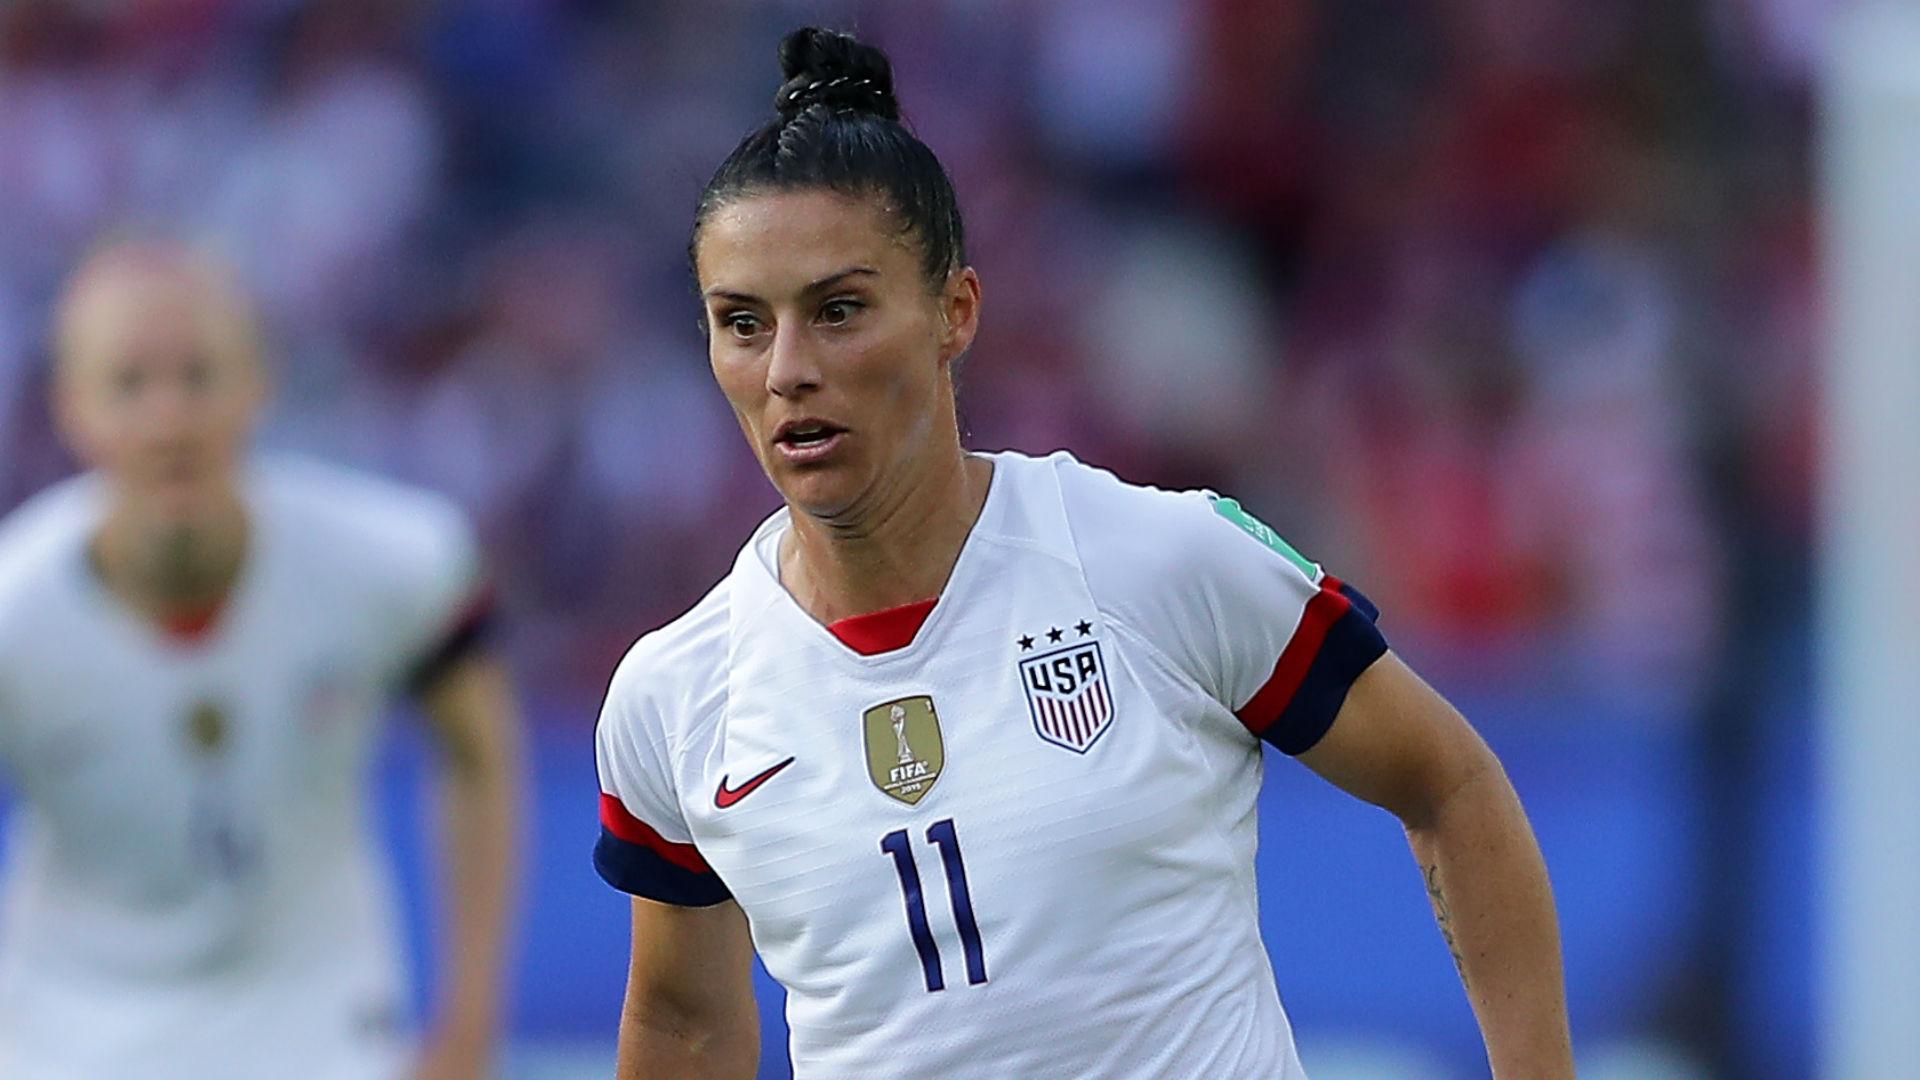 Women's World Cup 2019: Ali Krieger gets called up at halftime